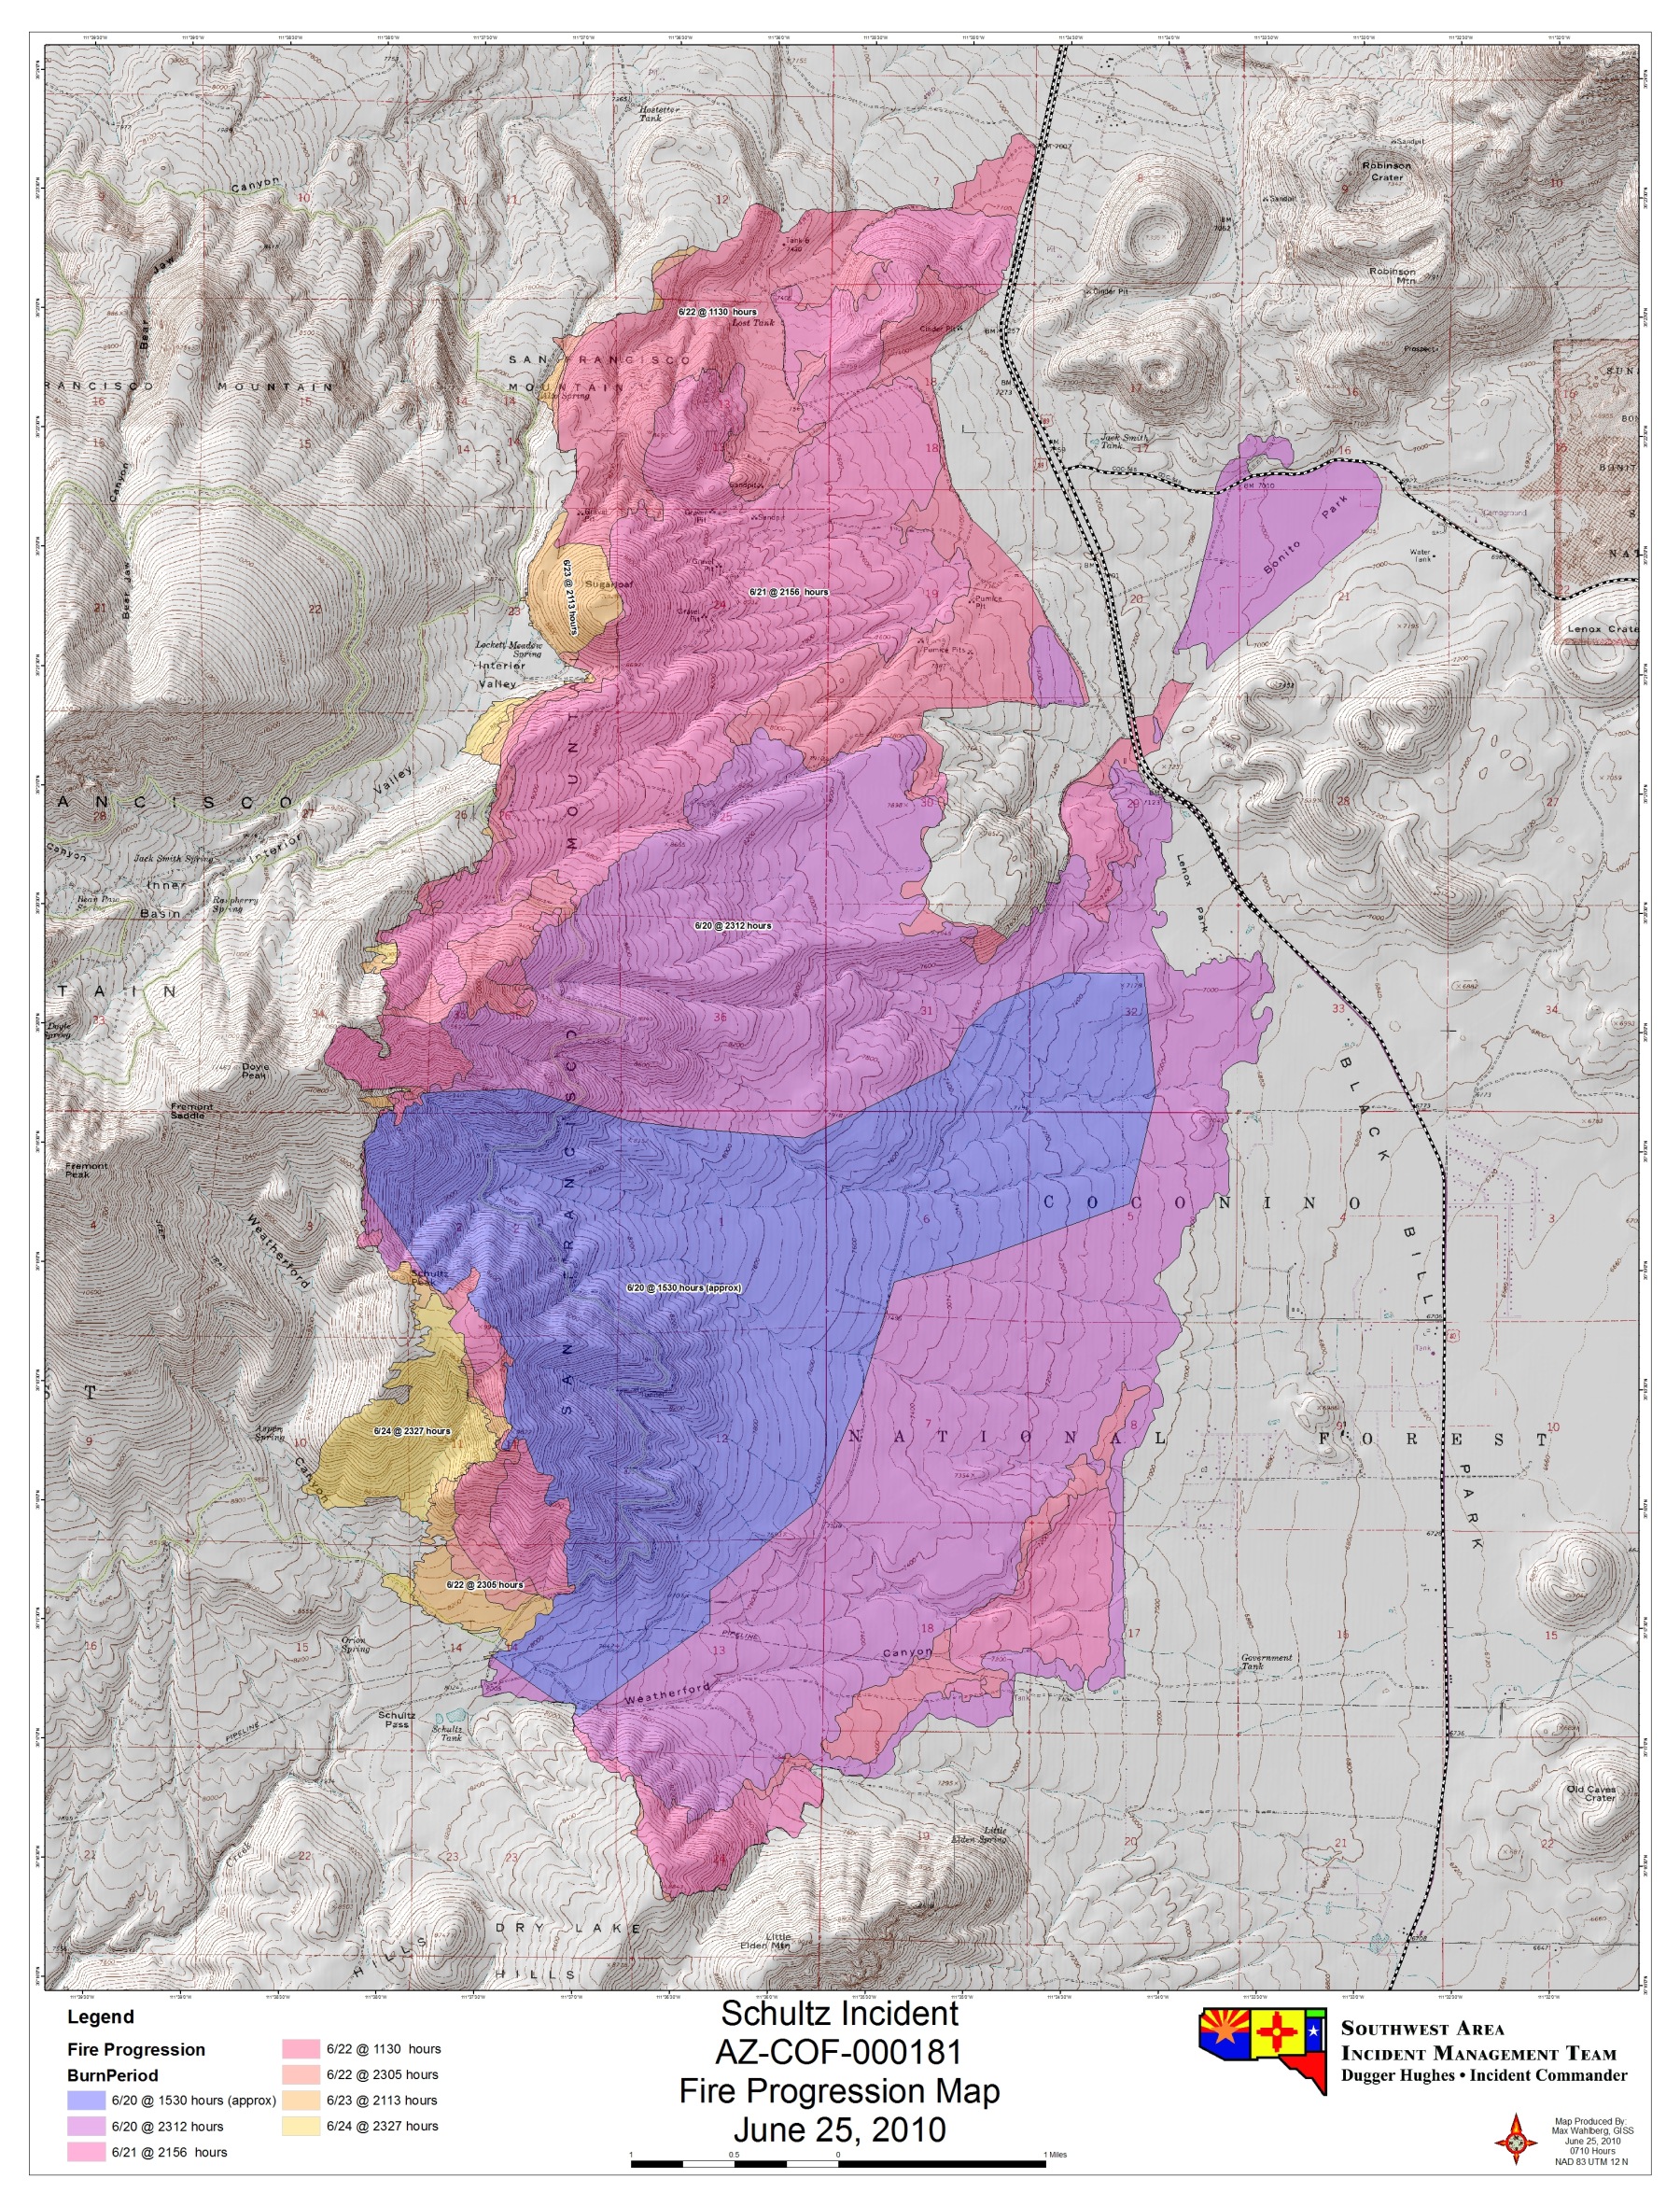 Outline of the Schultz Fire. Graphic Credit: USDA Forest Service, Rocky Mountain Research Station